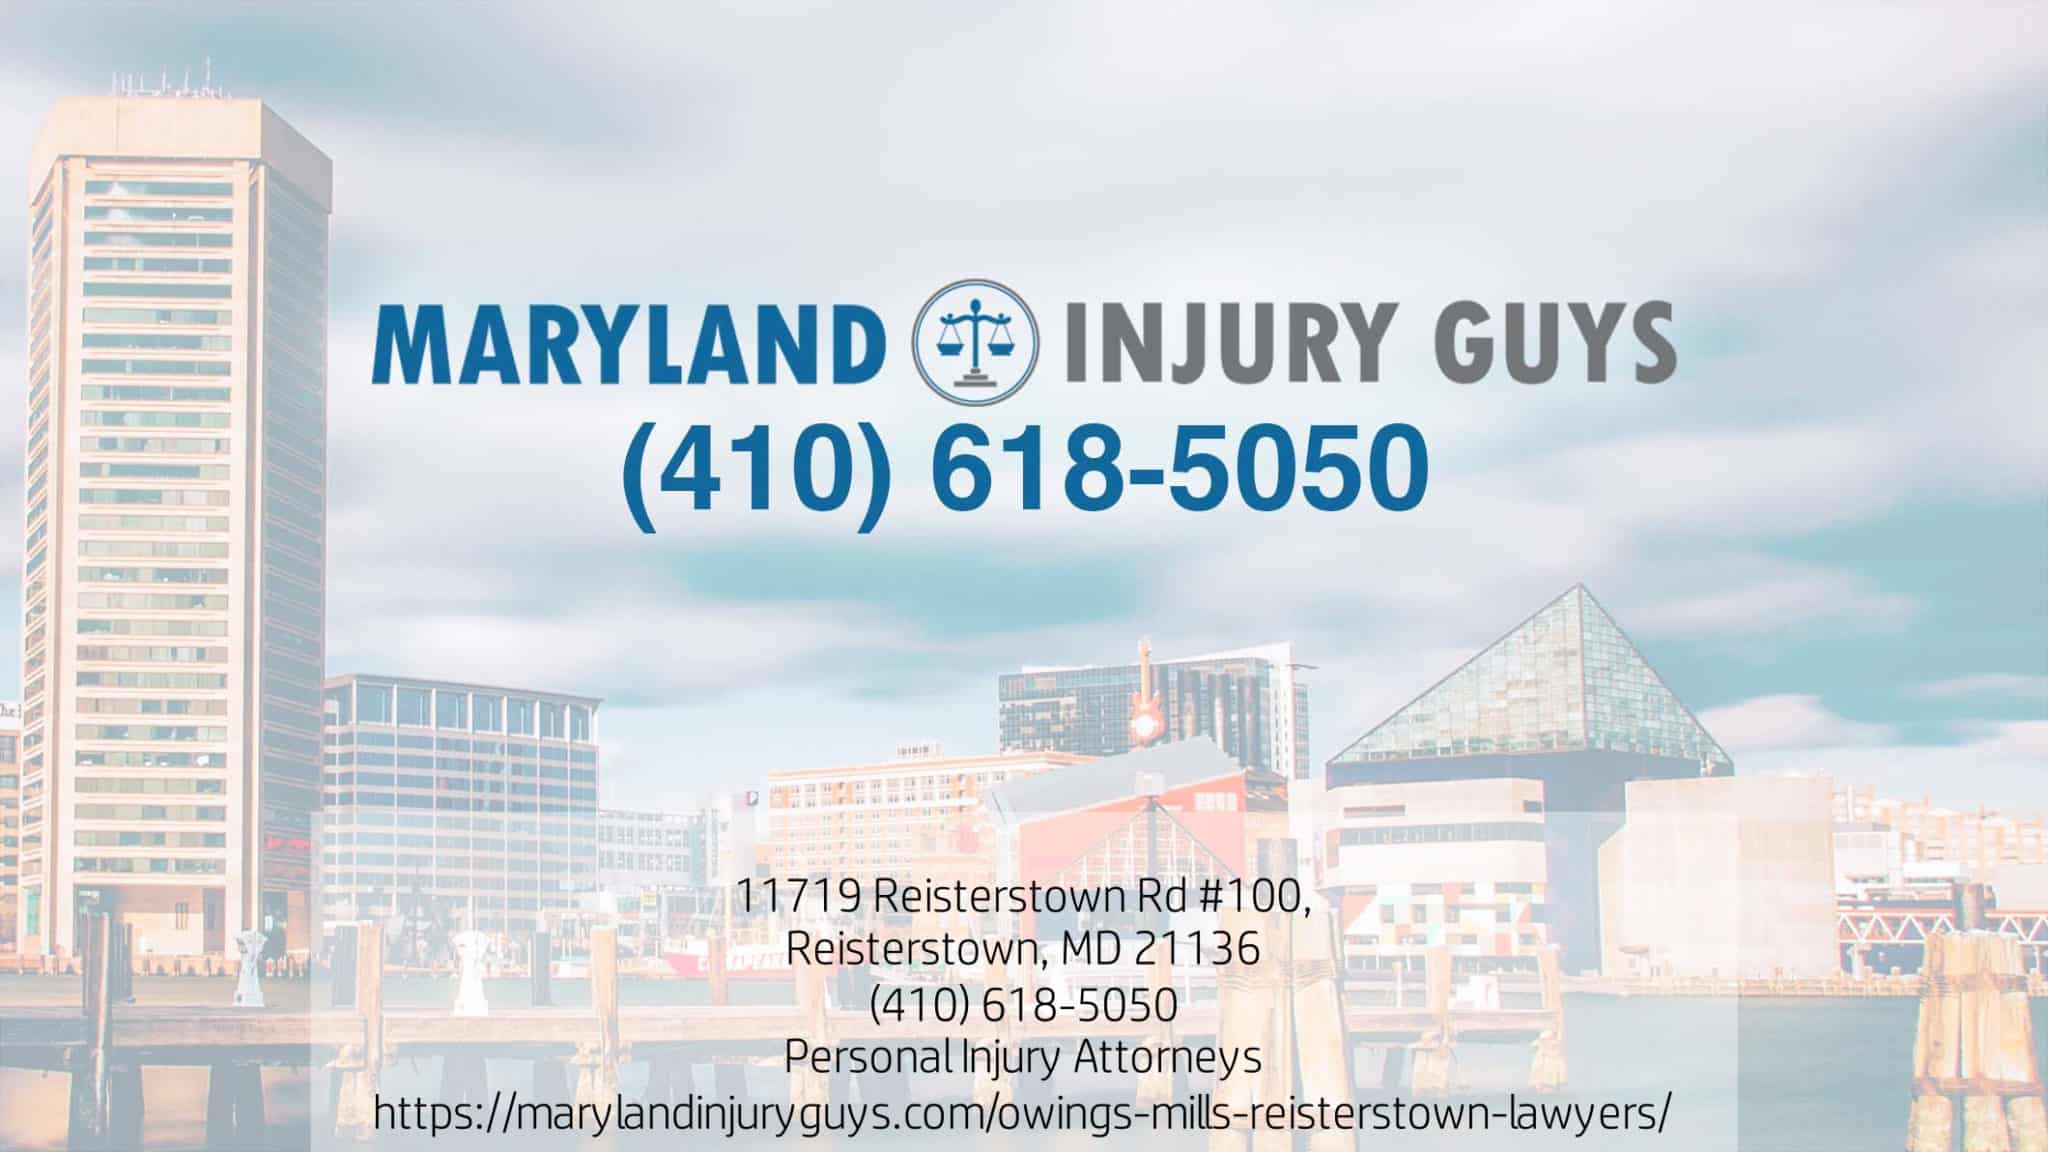 Get Compensation For Medical Malpractice Claims With Reisterstown Attorney